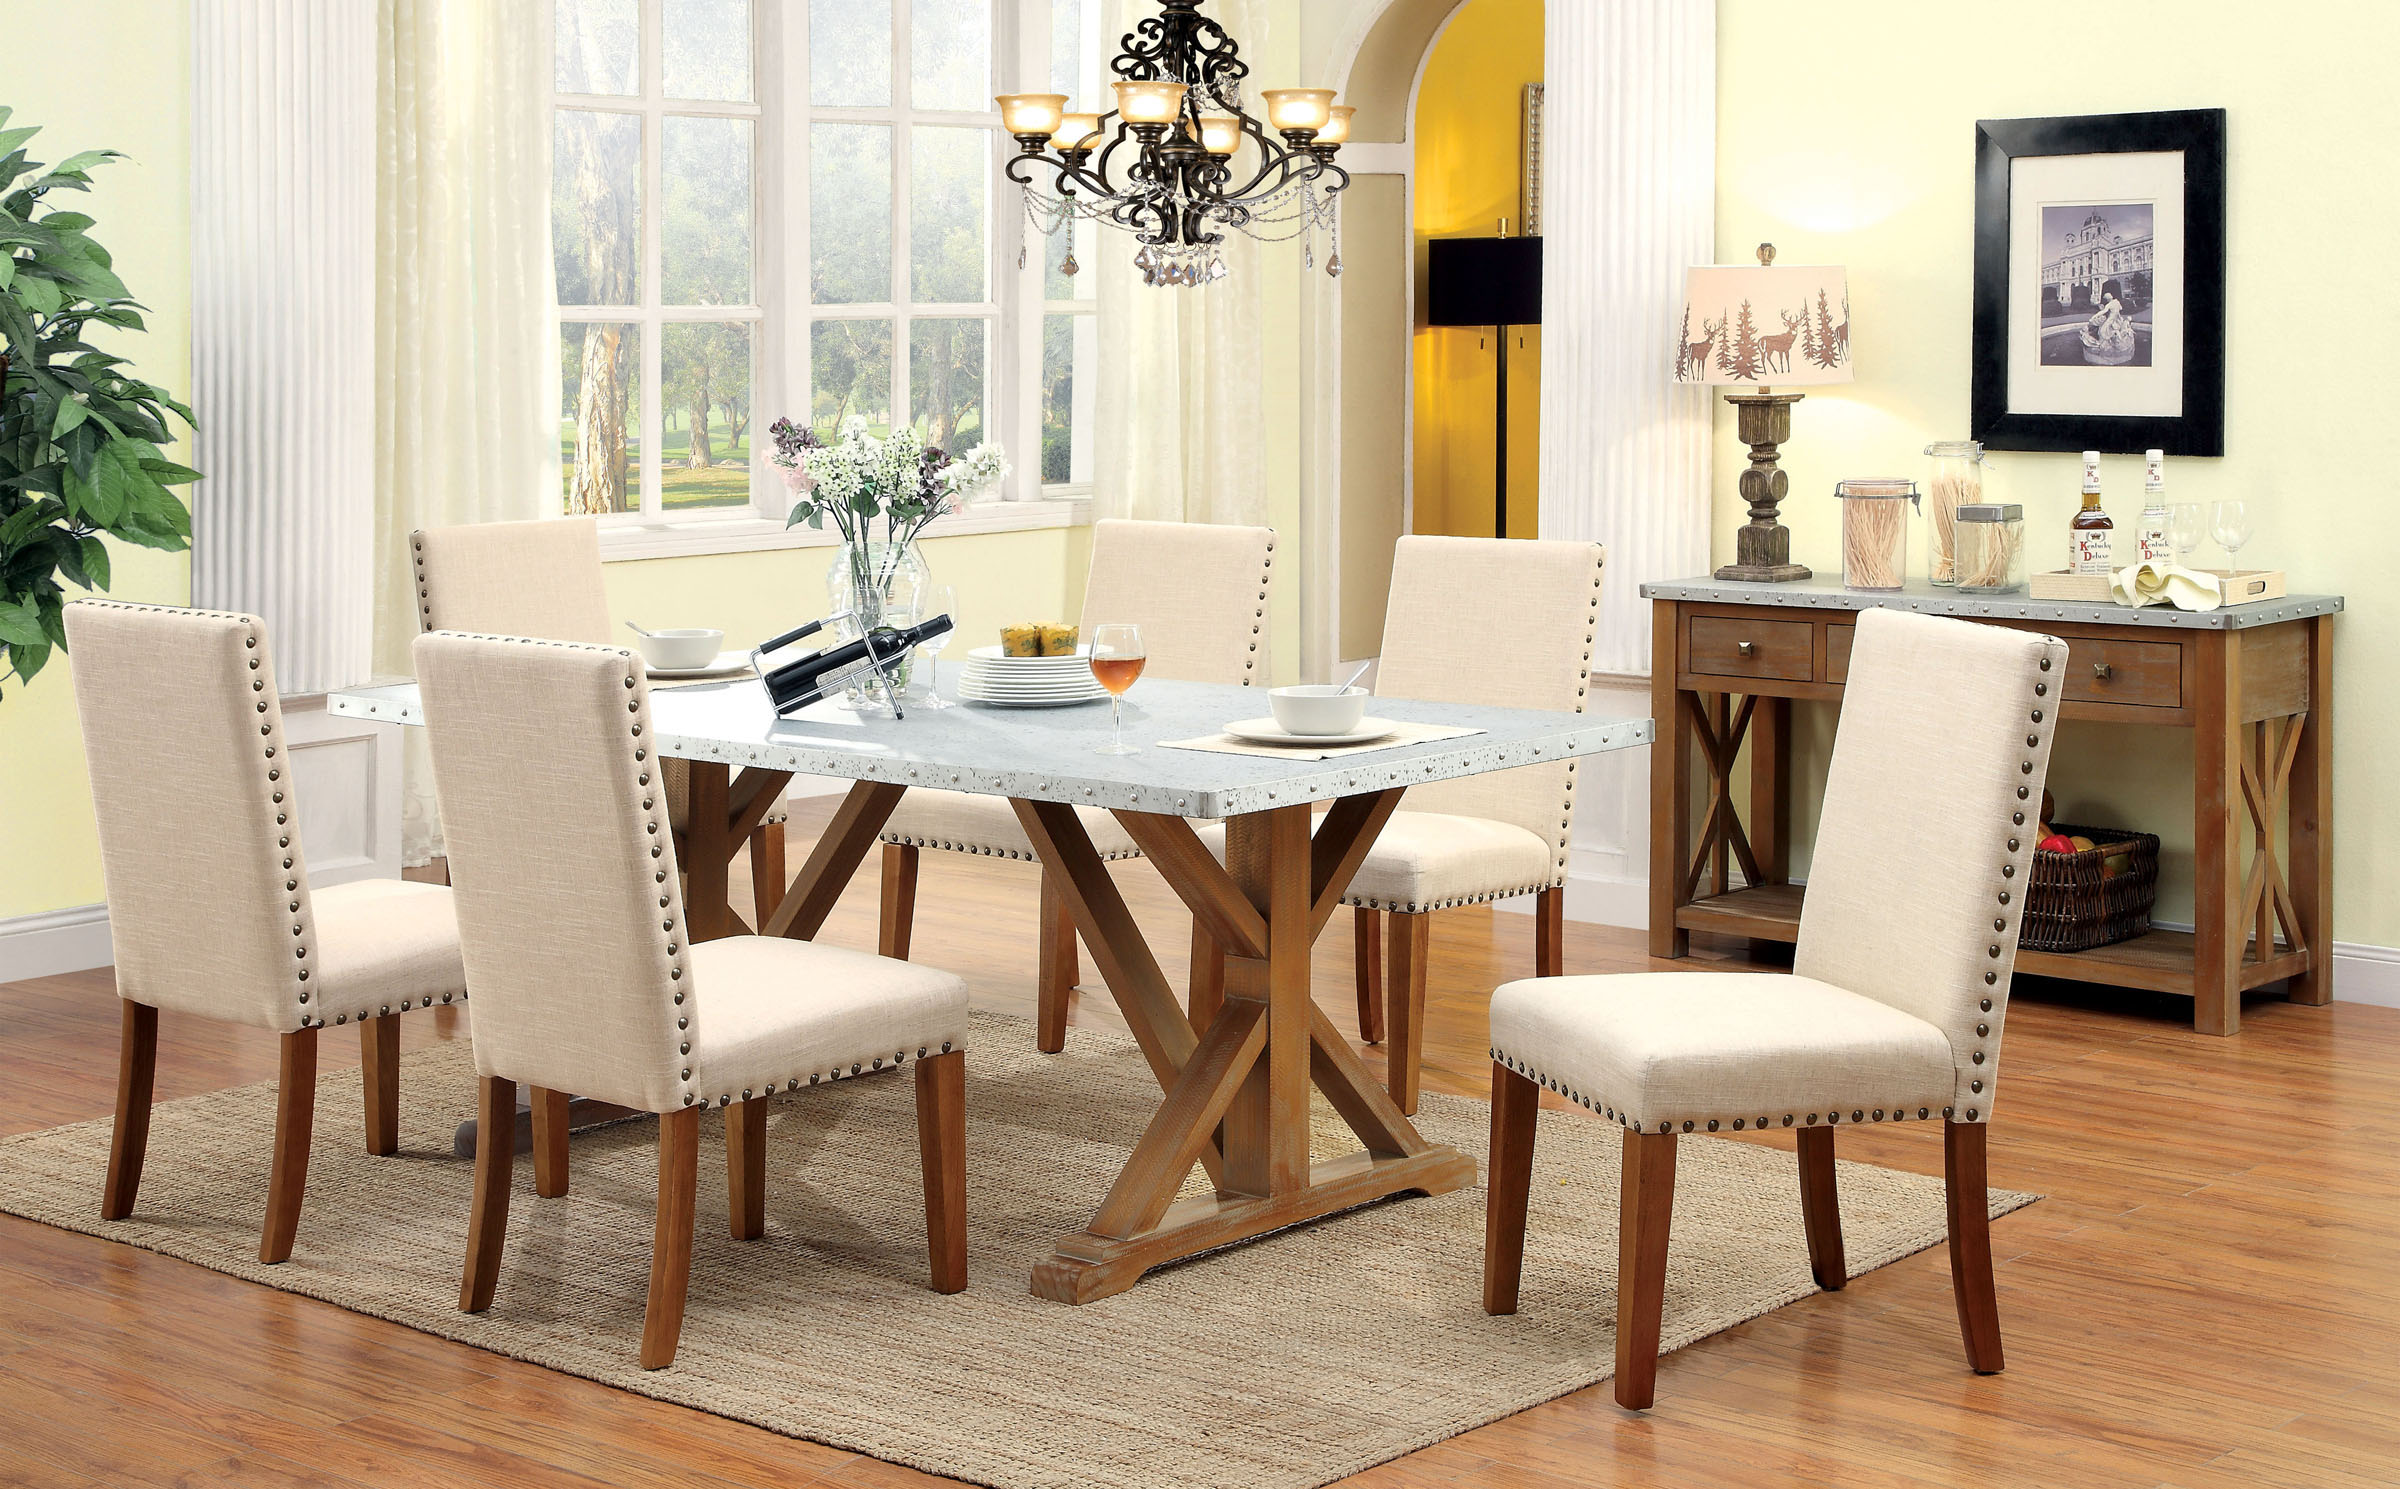  Natural Galvanized Dining Table Set